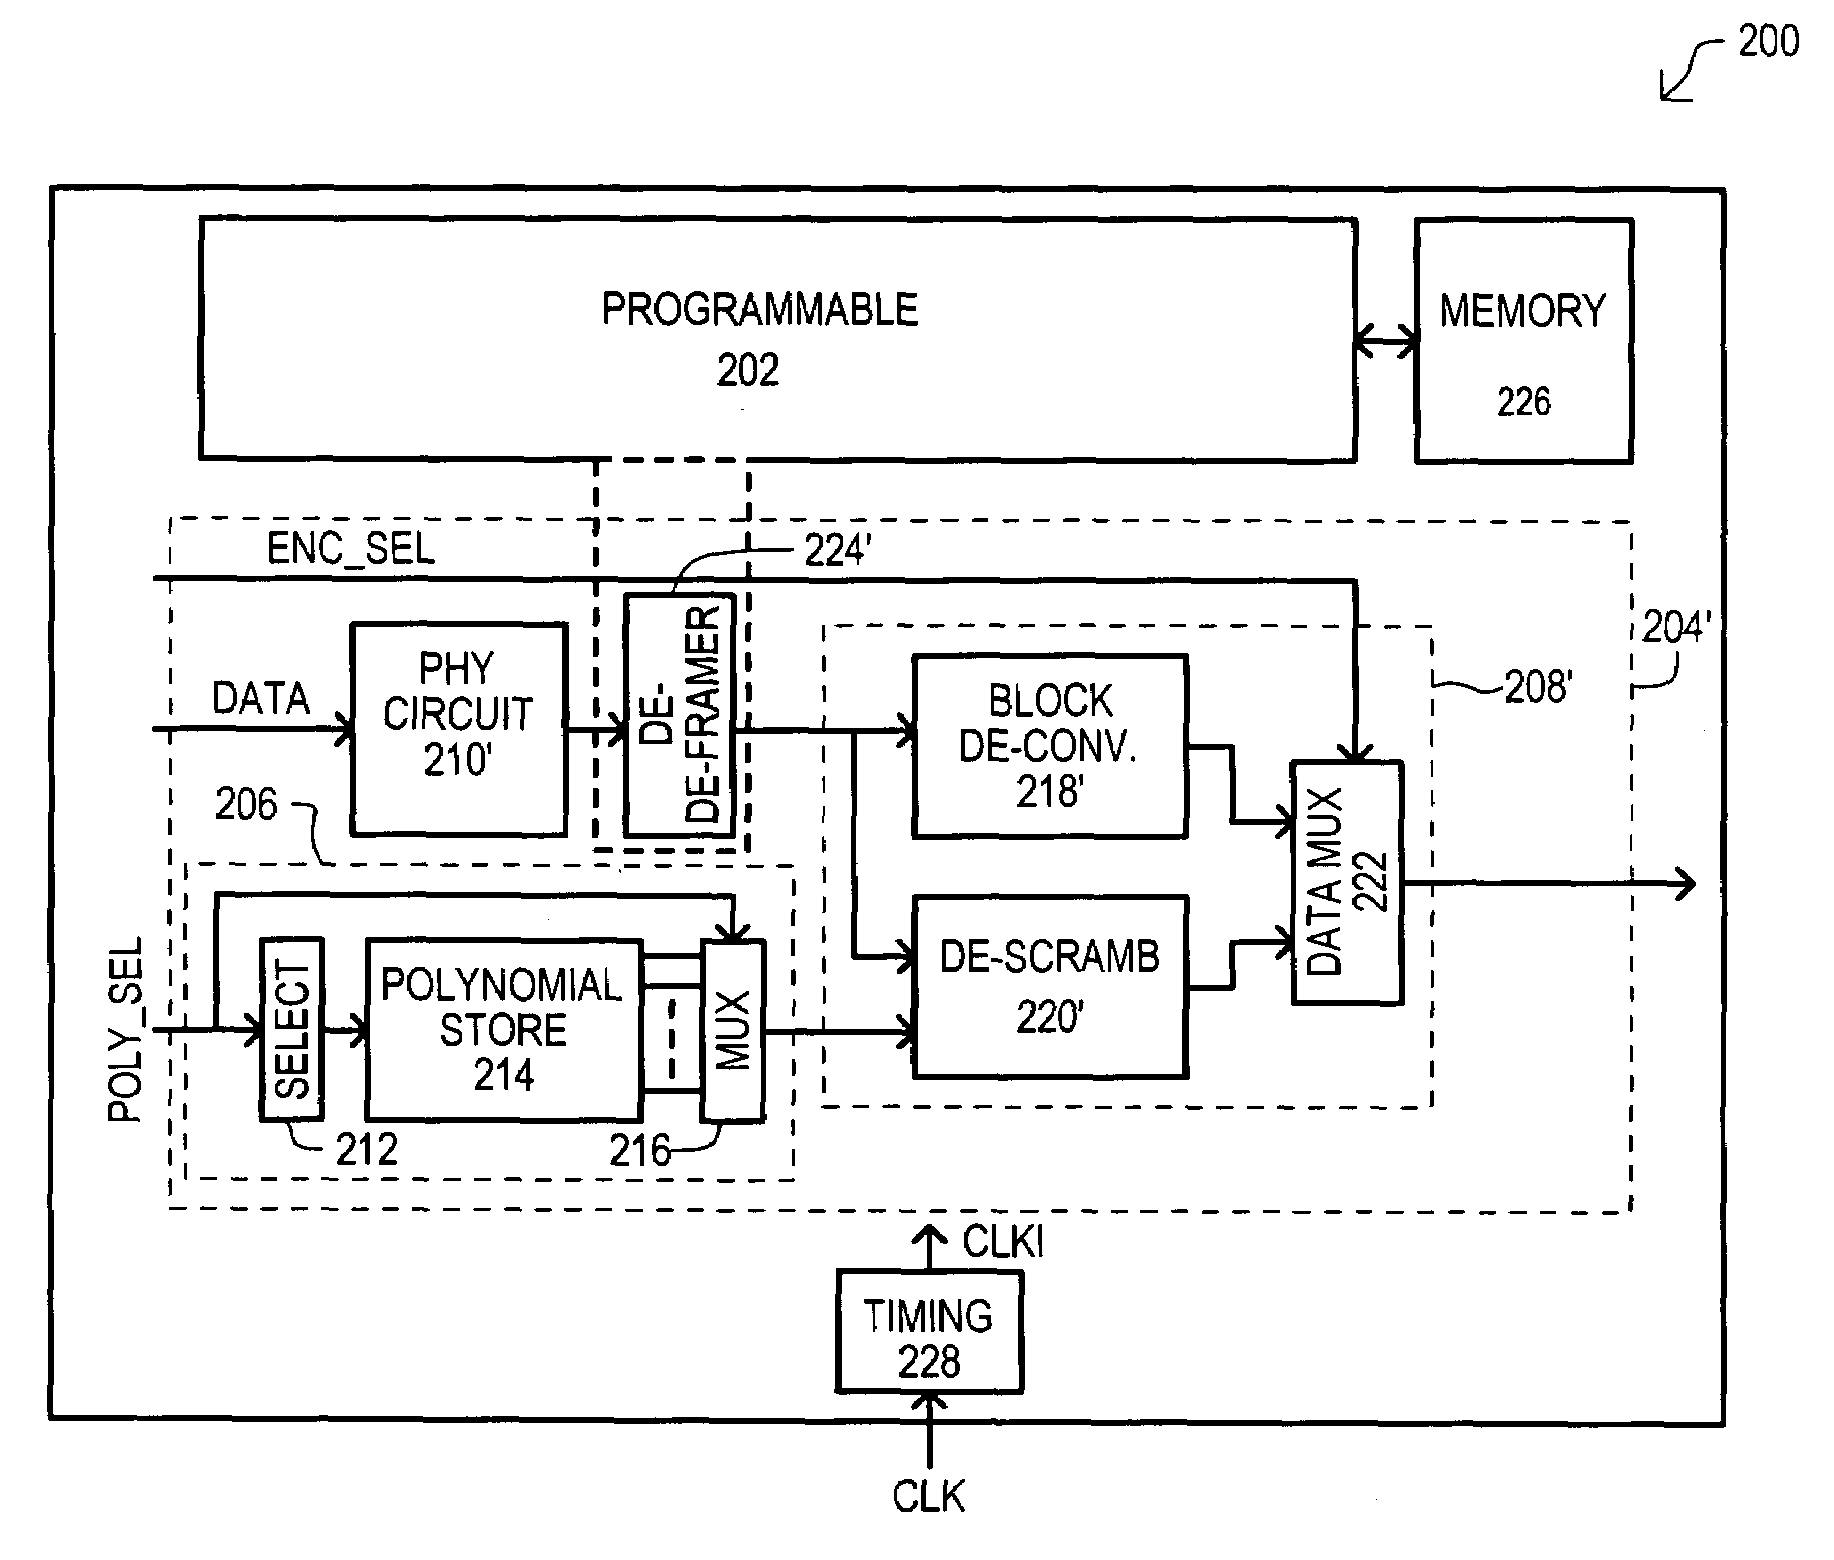 Architecture for efficient implementation of serial data communication functions on a programmable logic device (PLD)